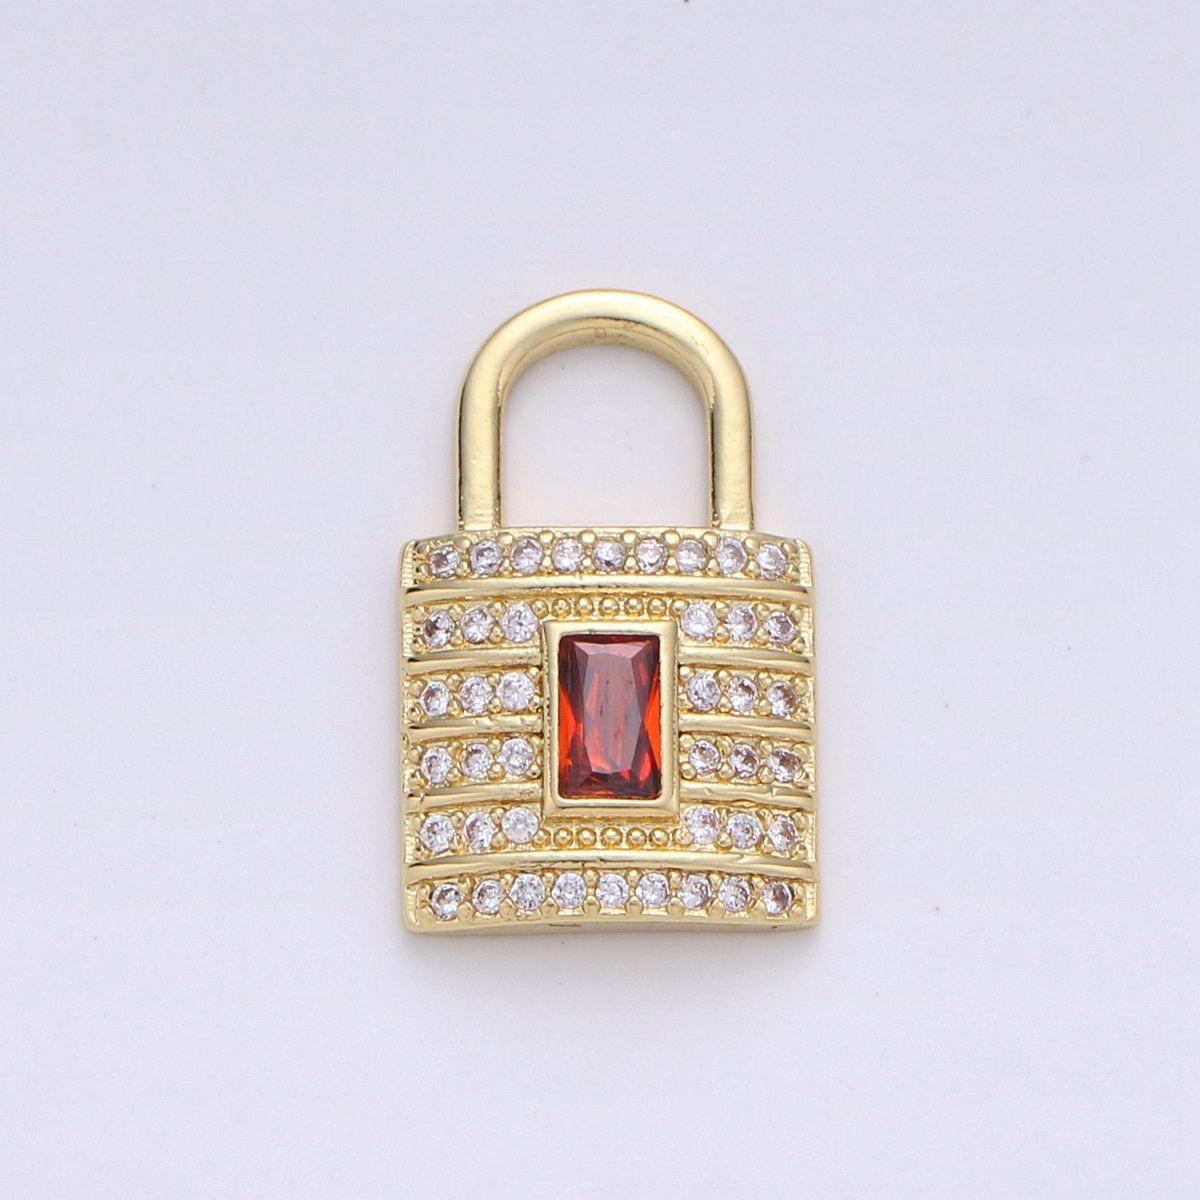 Dainty Gold Micro Pave Lock charm for Jewelry making, Minimalist, Simple Red Padlock charm for Bracelet Necklace Earring Component D-099 - DLUXCA